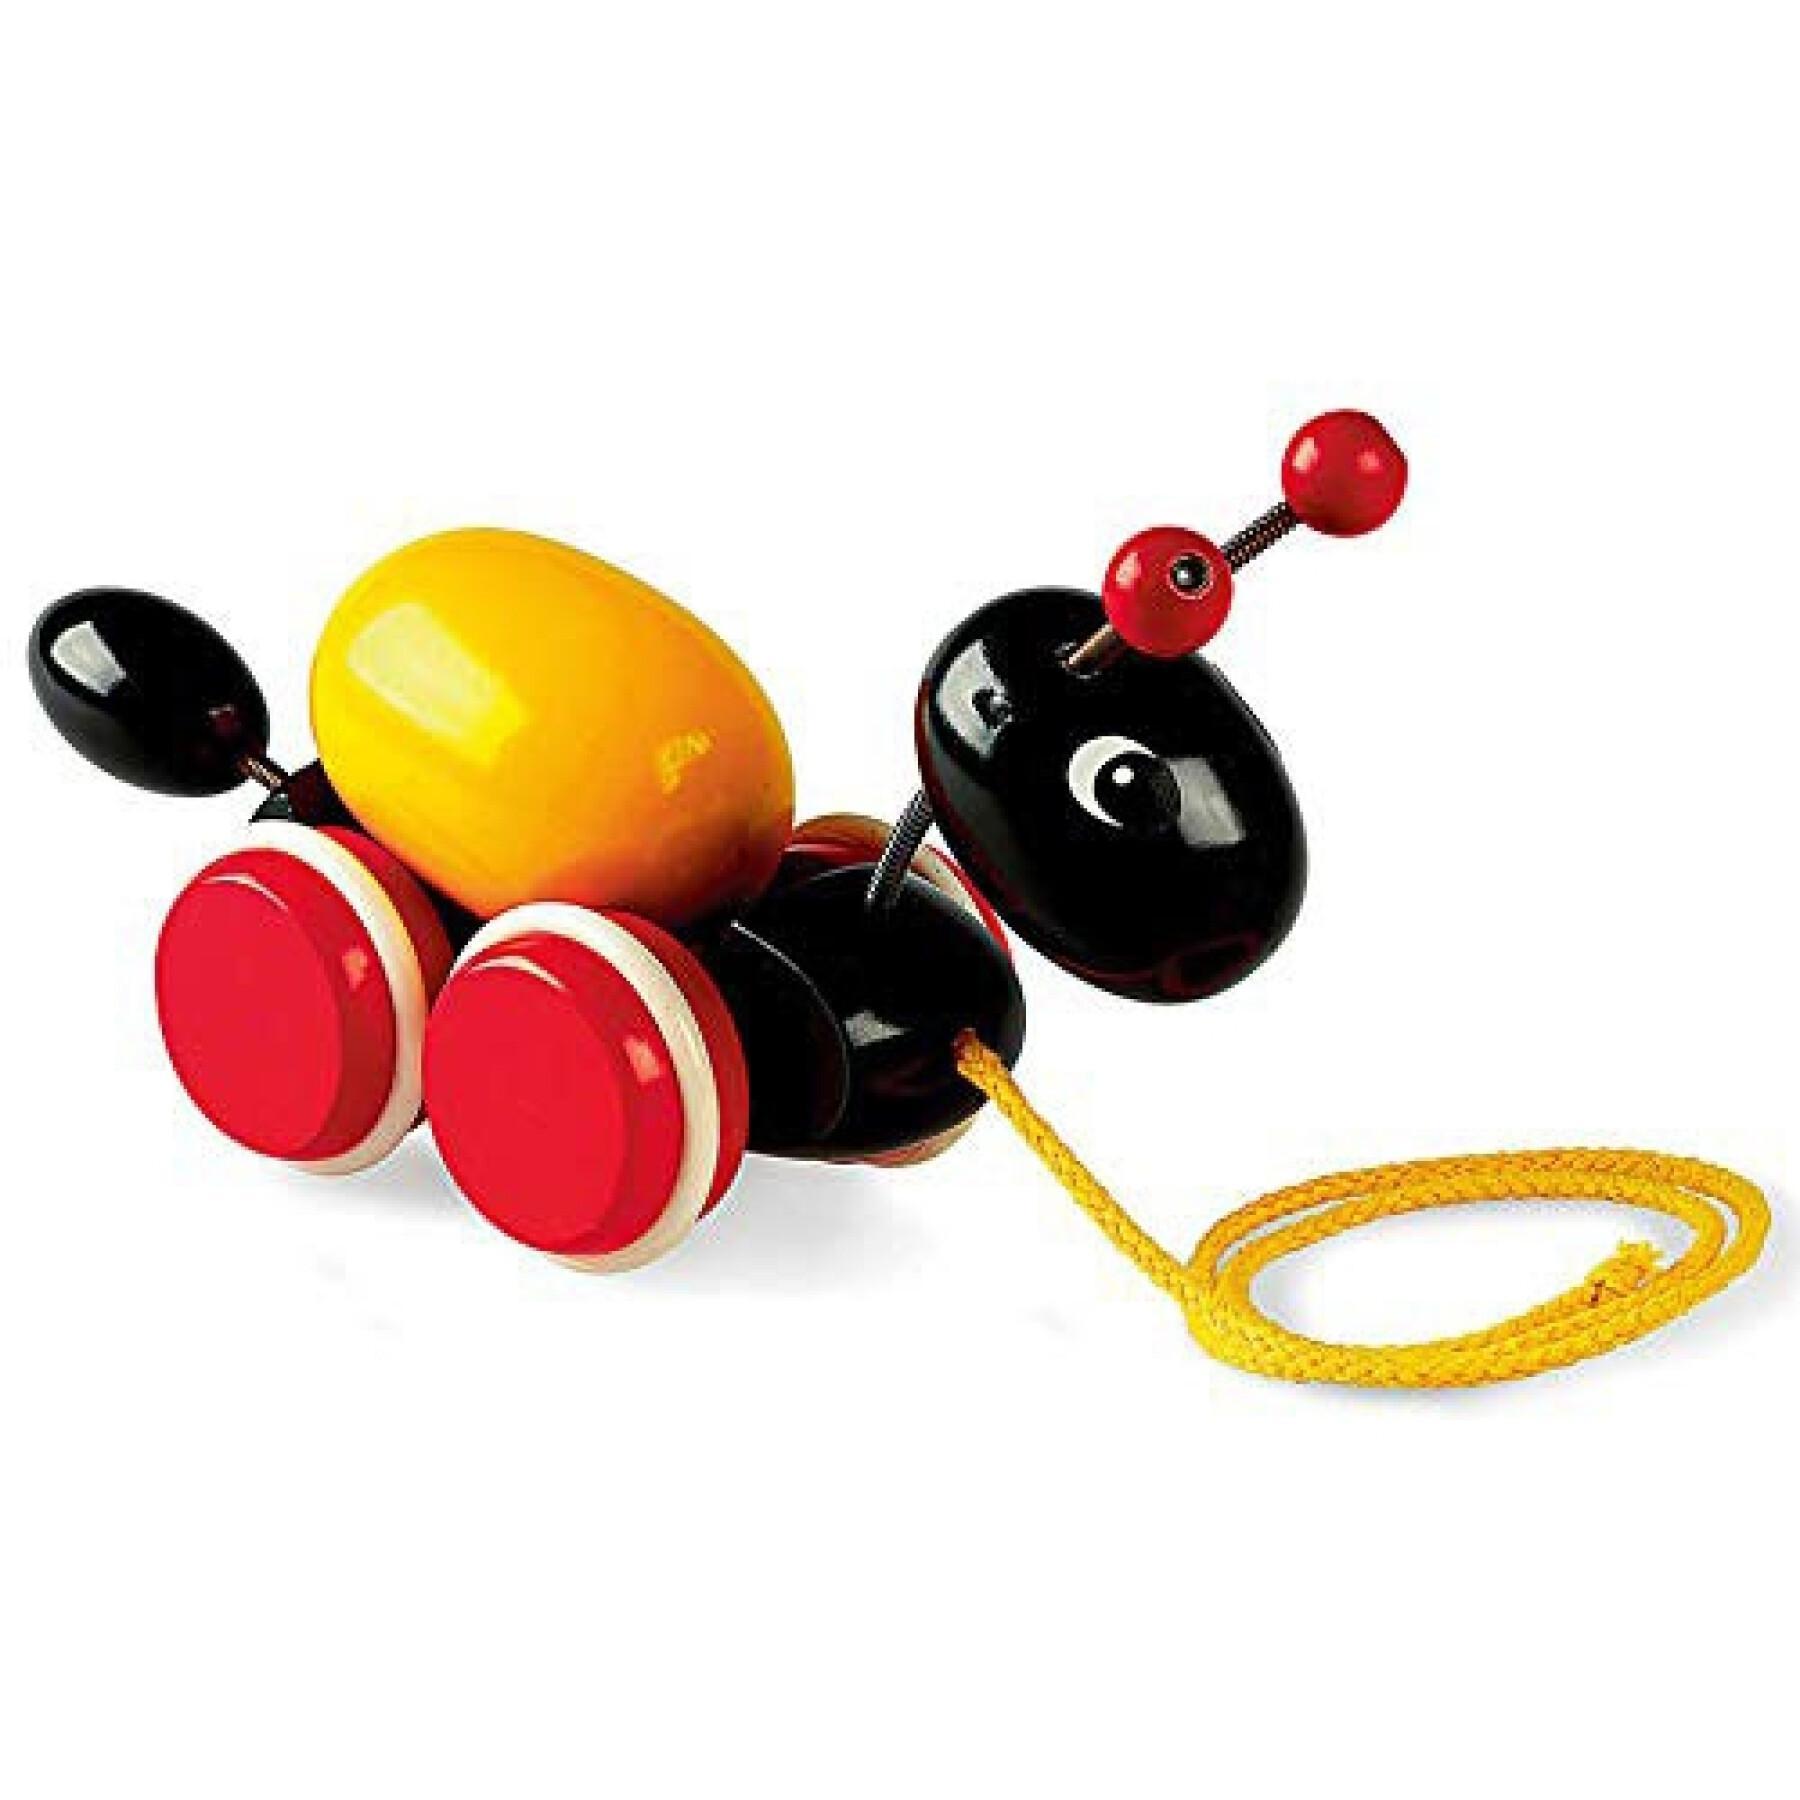 Ant push and pull toy Brio